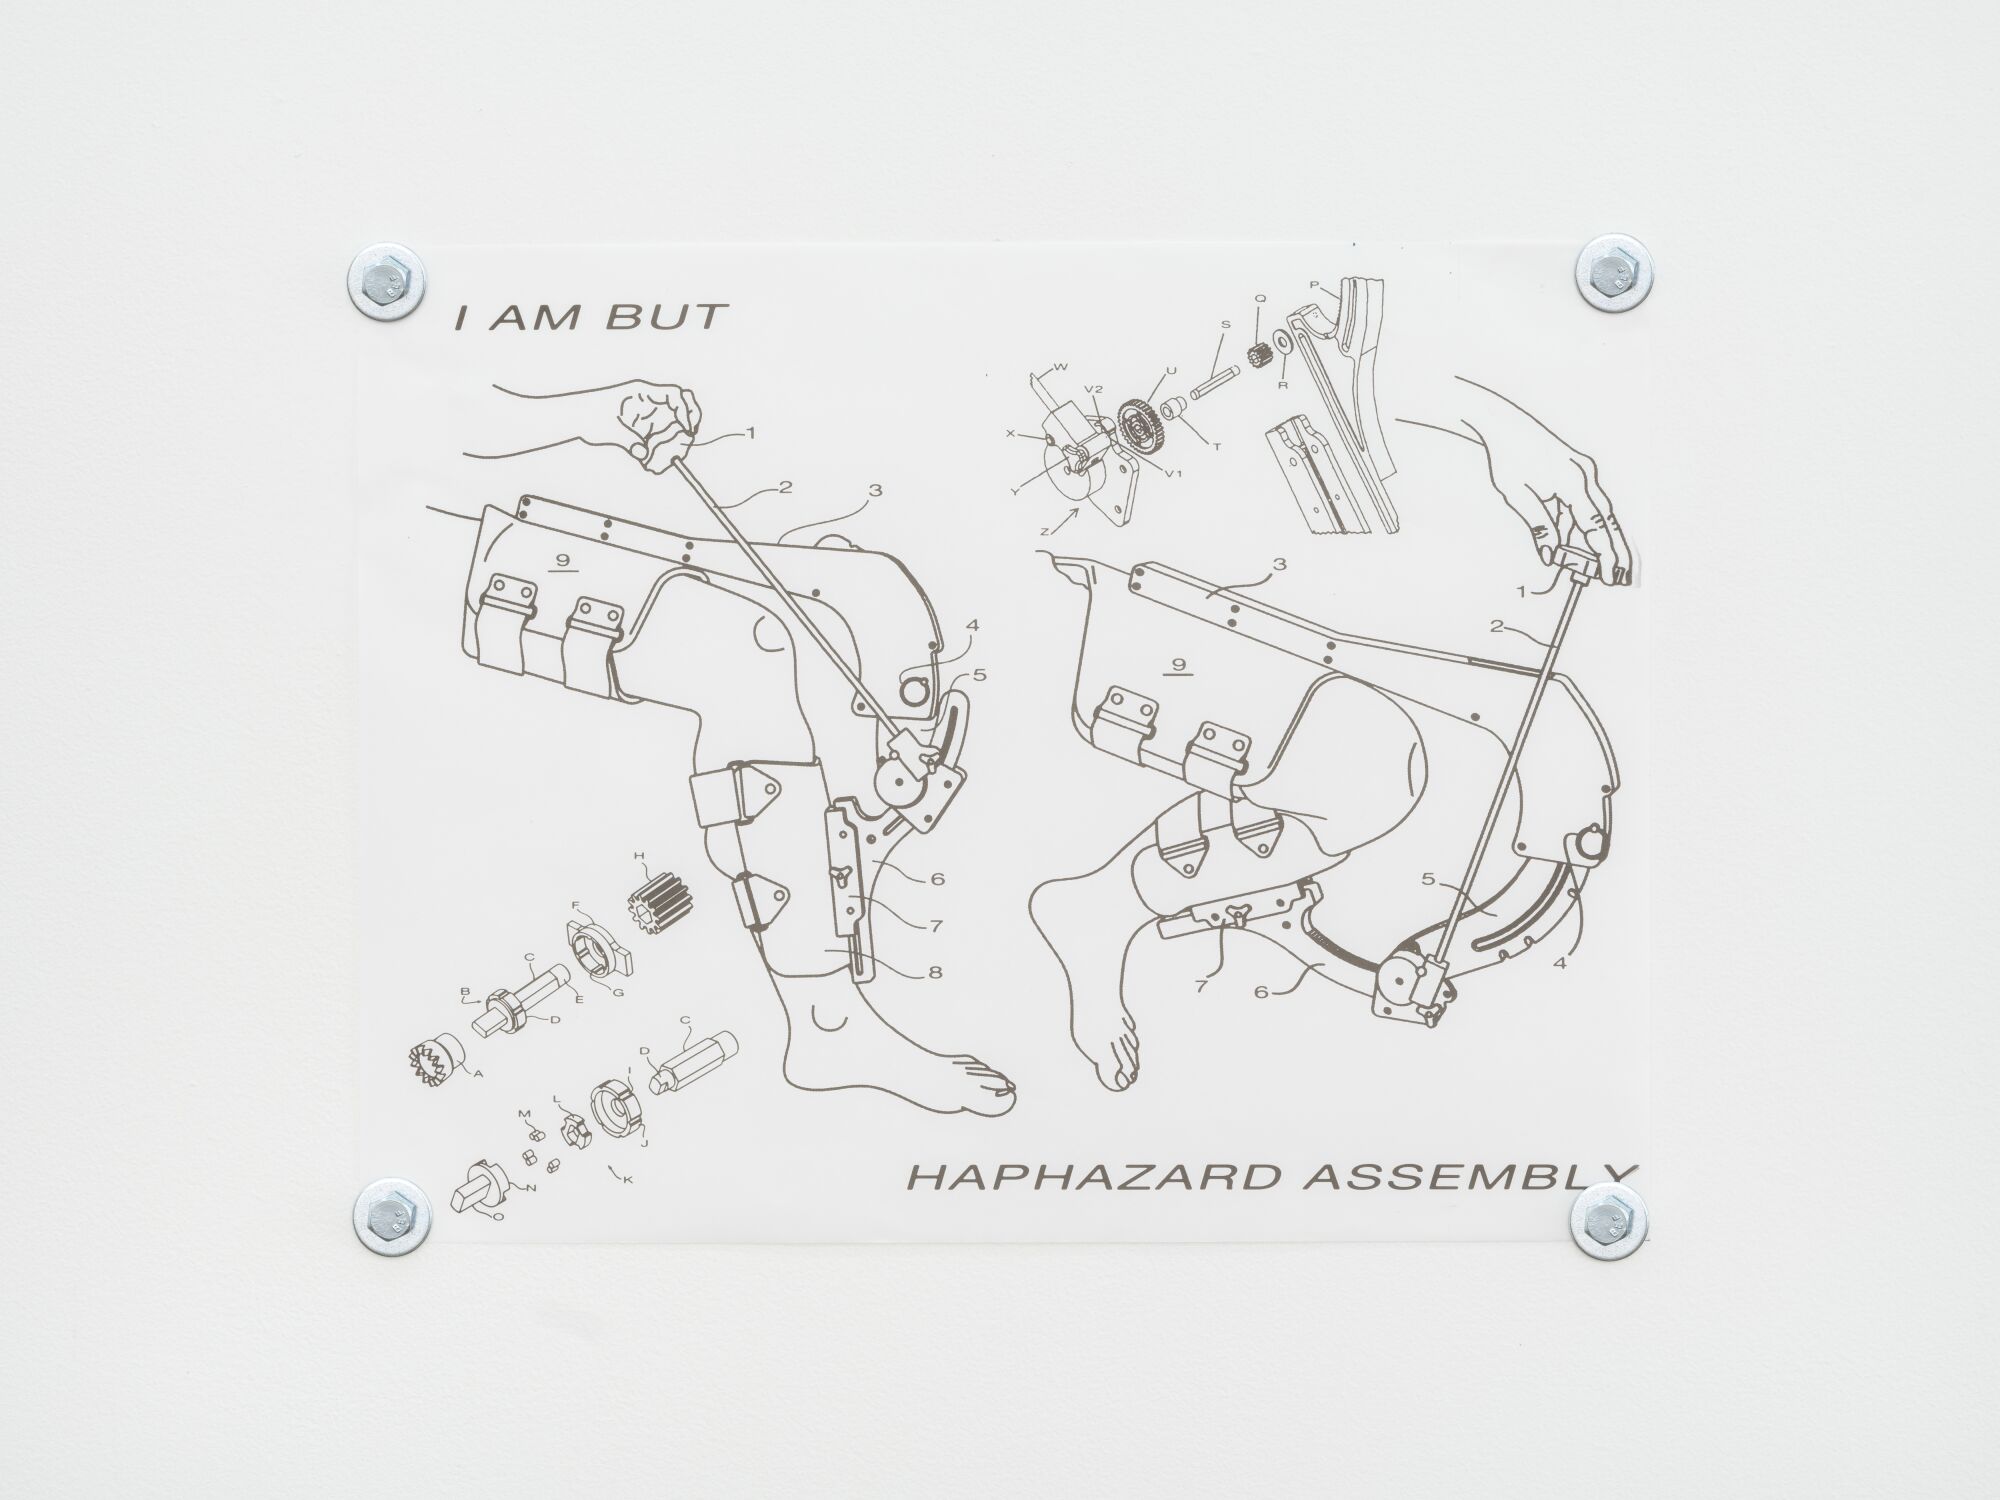 A diagram of body parts by Abareshi with the words "I am but haphazard assembly."